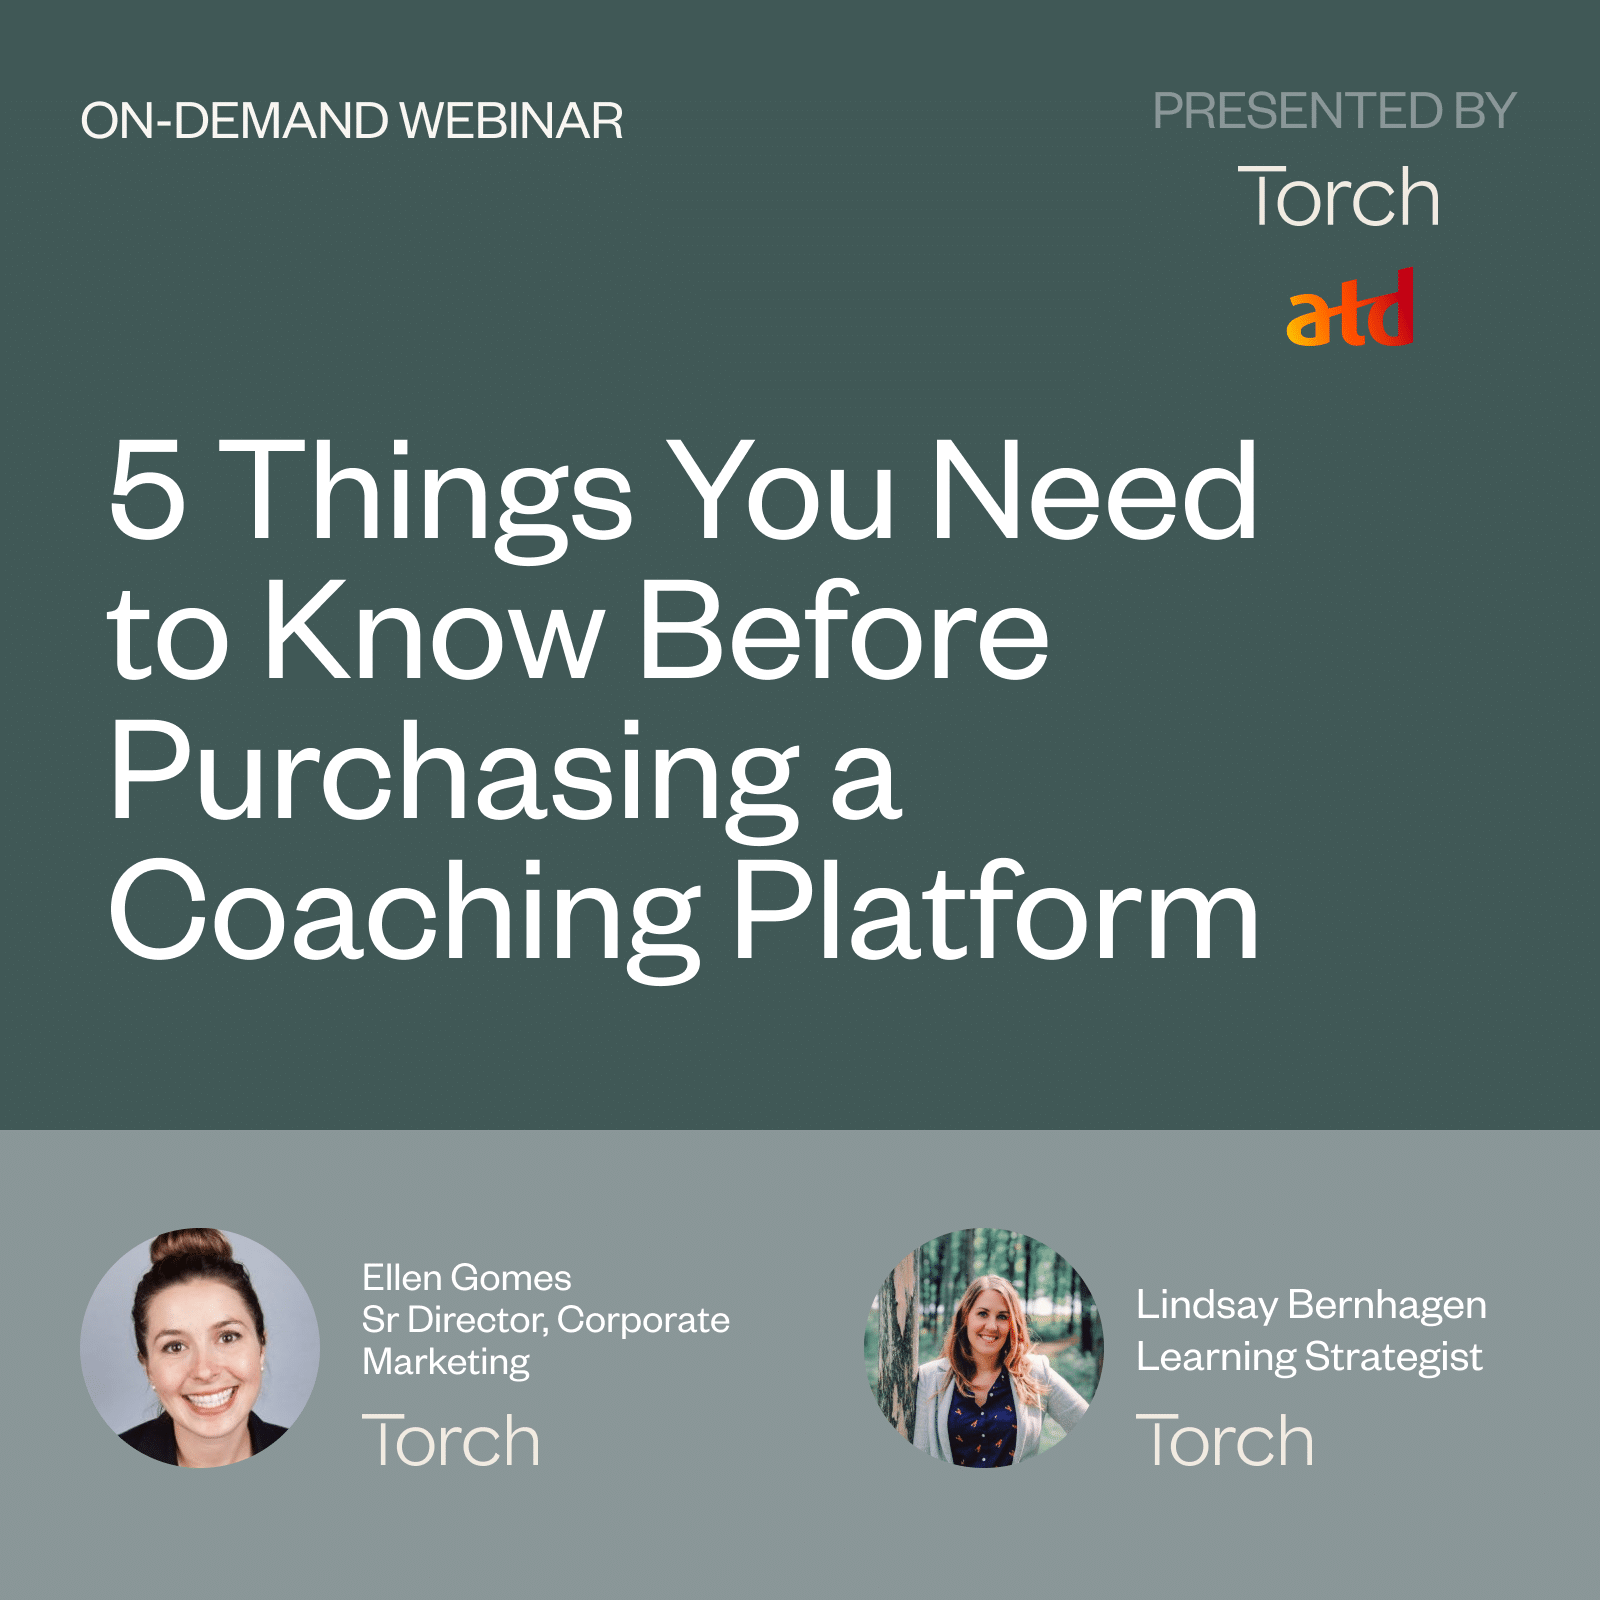 5 Things You Need to Know Before Purchasing a Coaching Platform